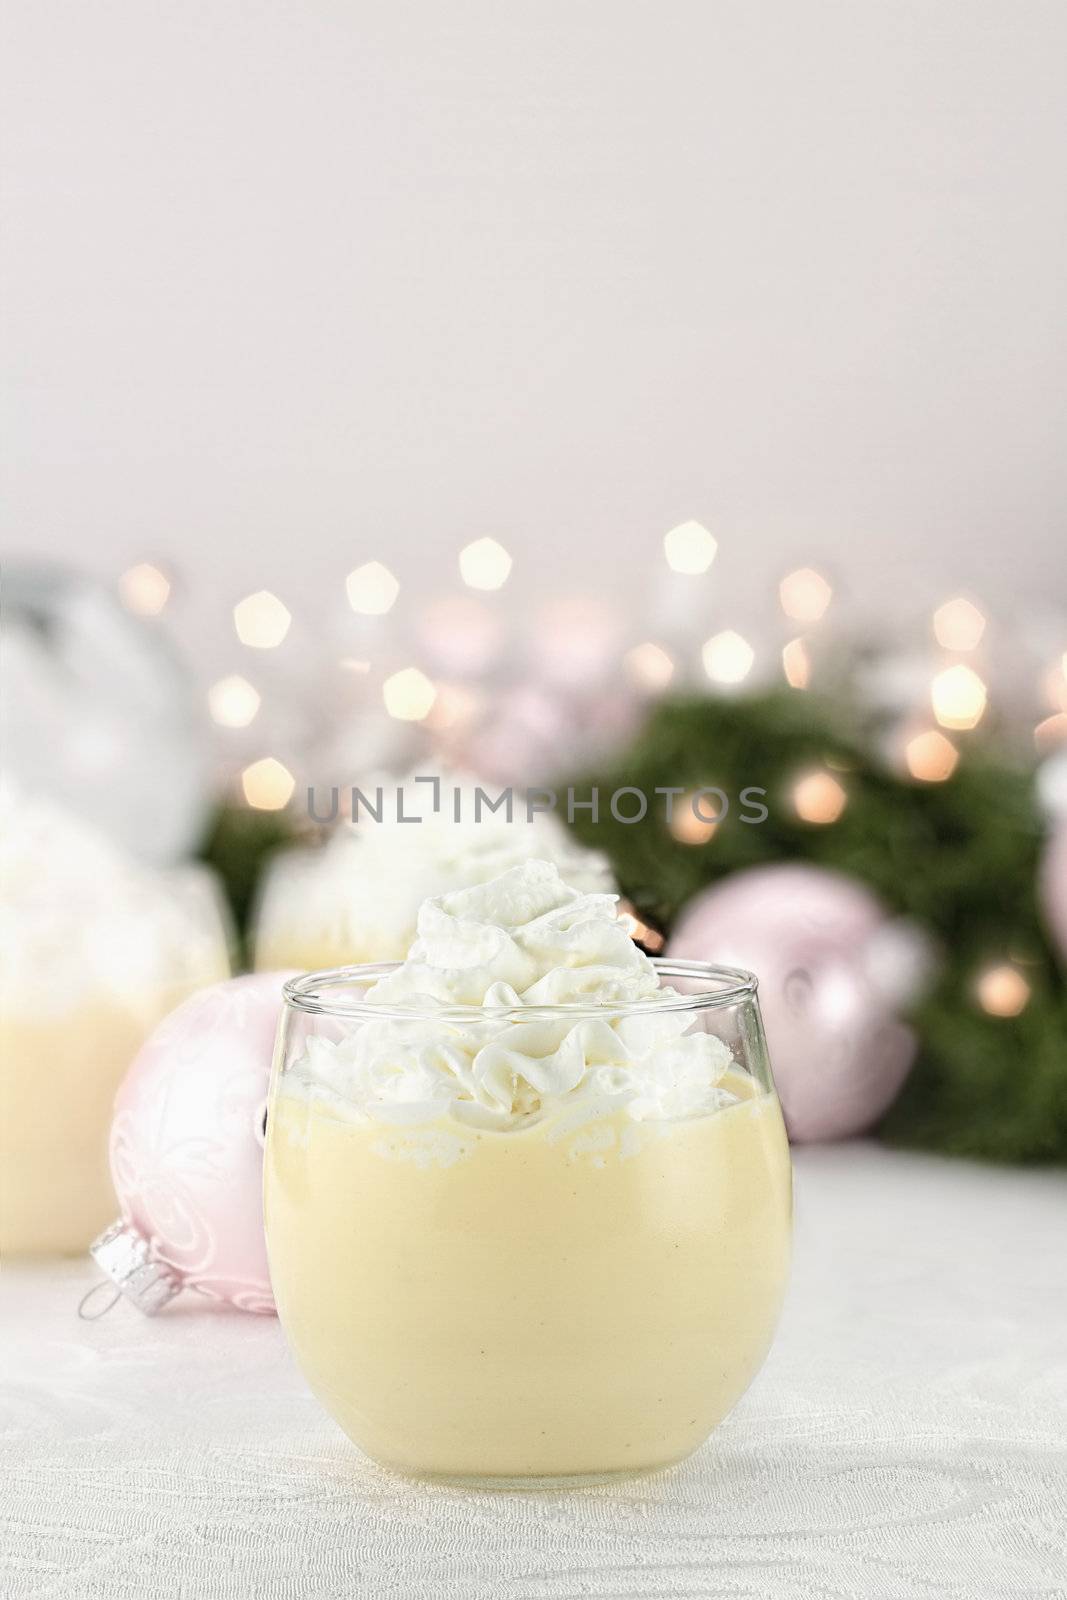 Eggnog in Fluted Crystal Glasses by StephanieFrey